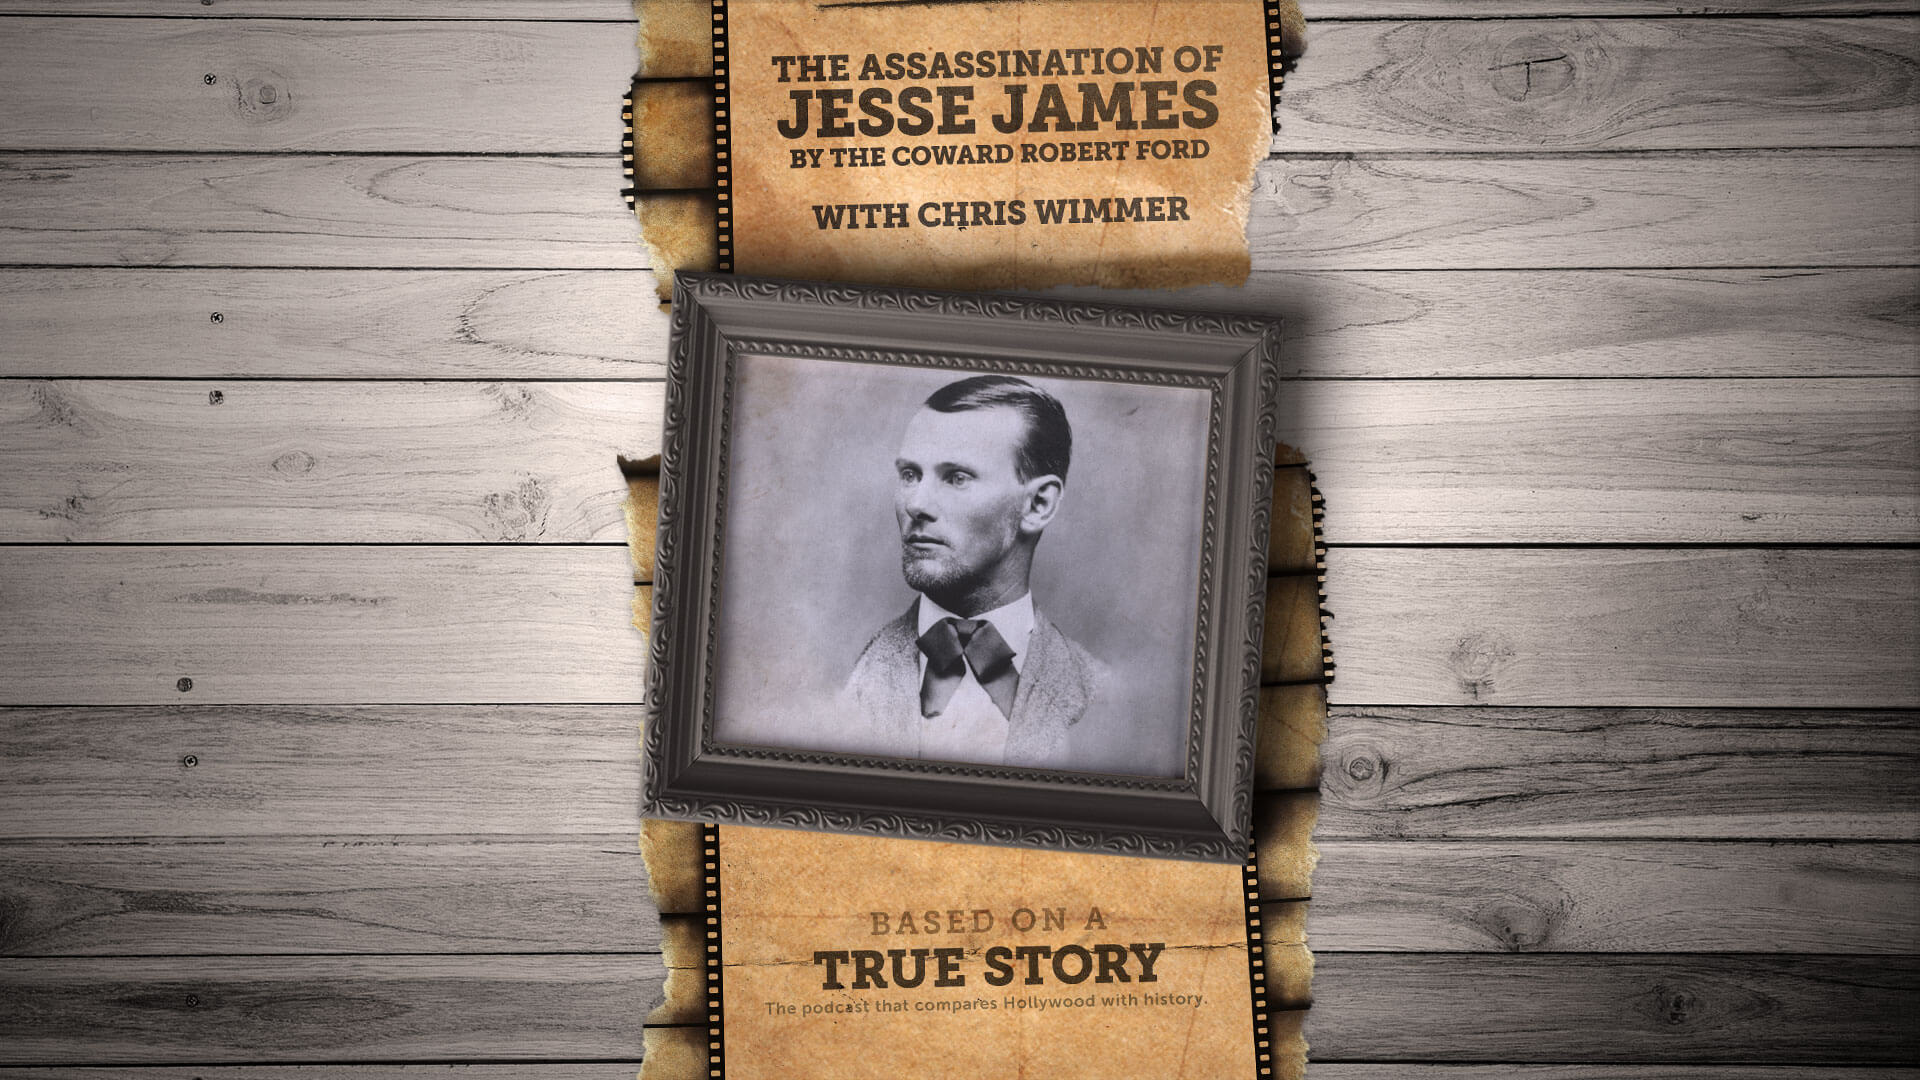 who killed jesse james in 1882